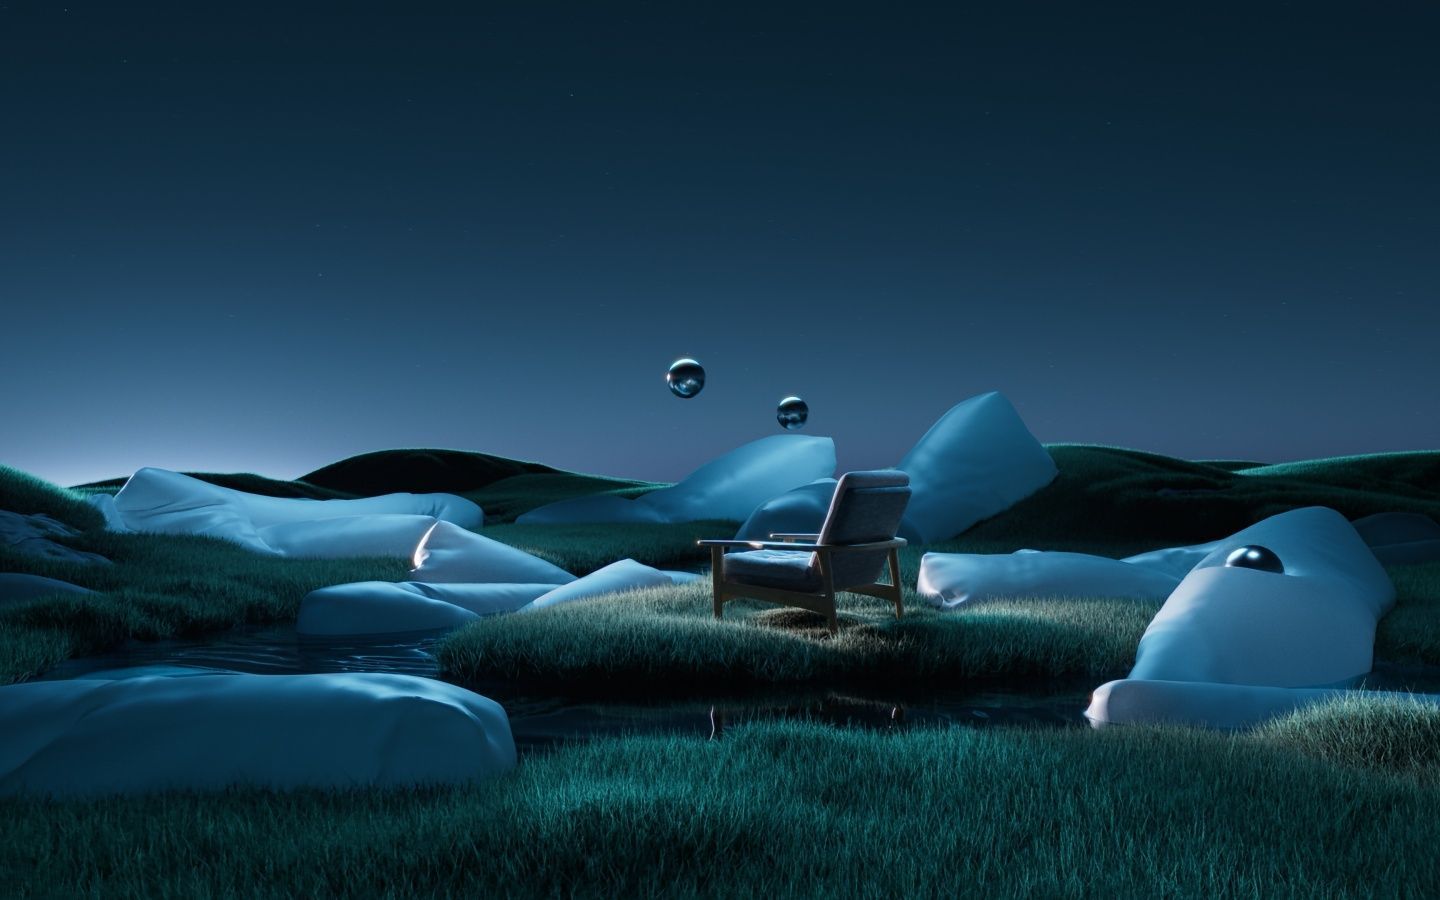 A chair on a grassy field with strange floating blue rocks - 1440x900